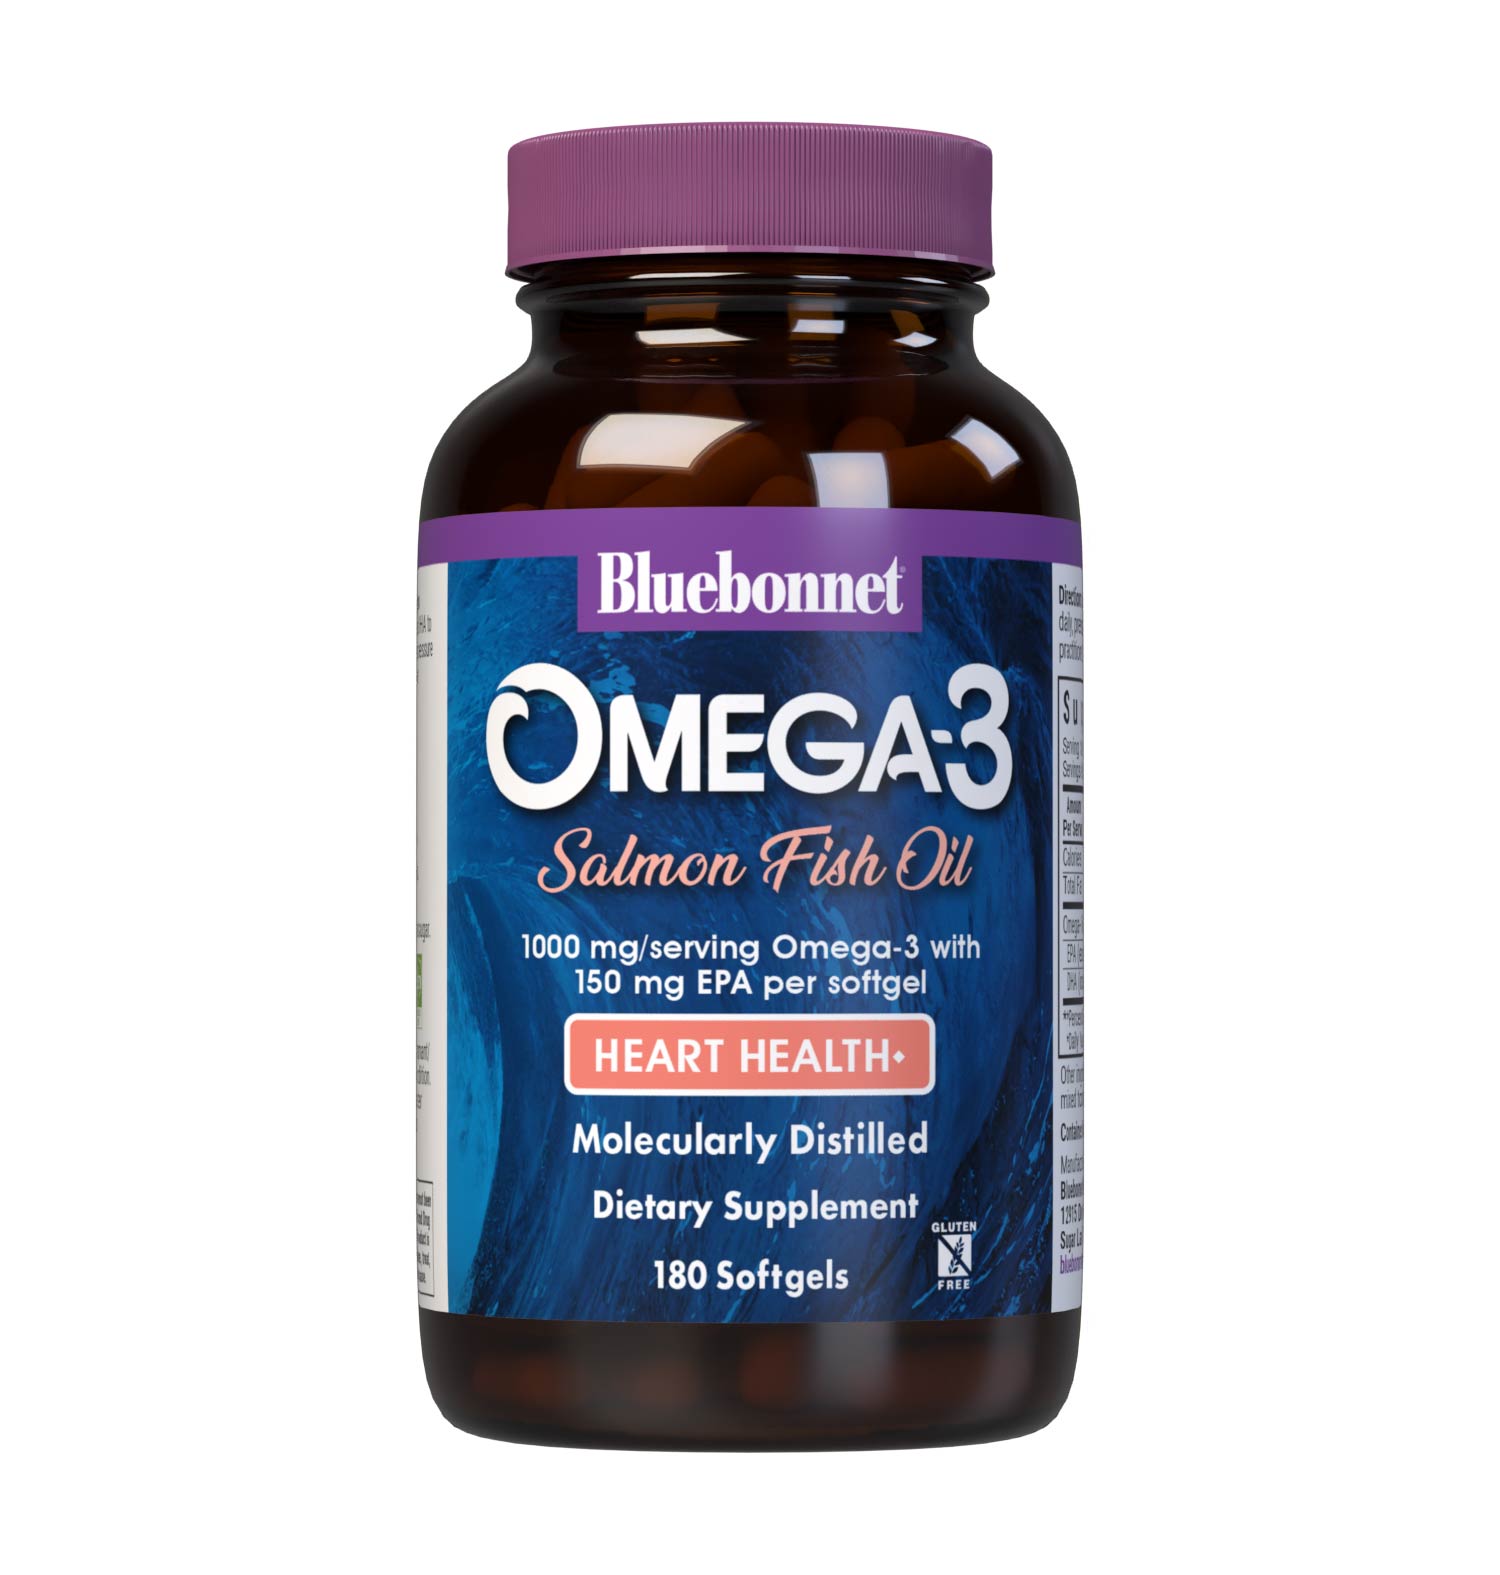 Bluebonnet’s Omega-3 Salmon Oil 180 Softgels are formulated with a specific ratio of EPA and DHA to help support heart health, blood flow, and blood pressure within the normal range by utilizing ultra-refined omega 3-s from salmon fish oil. #size_180 count